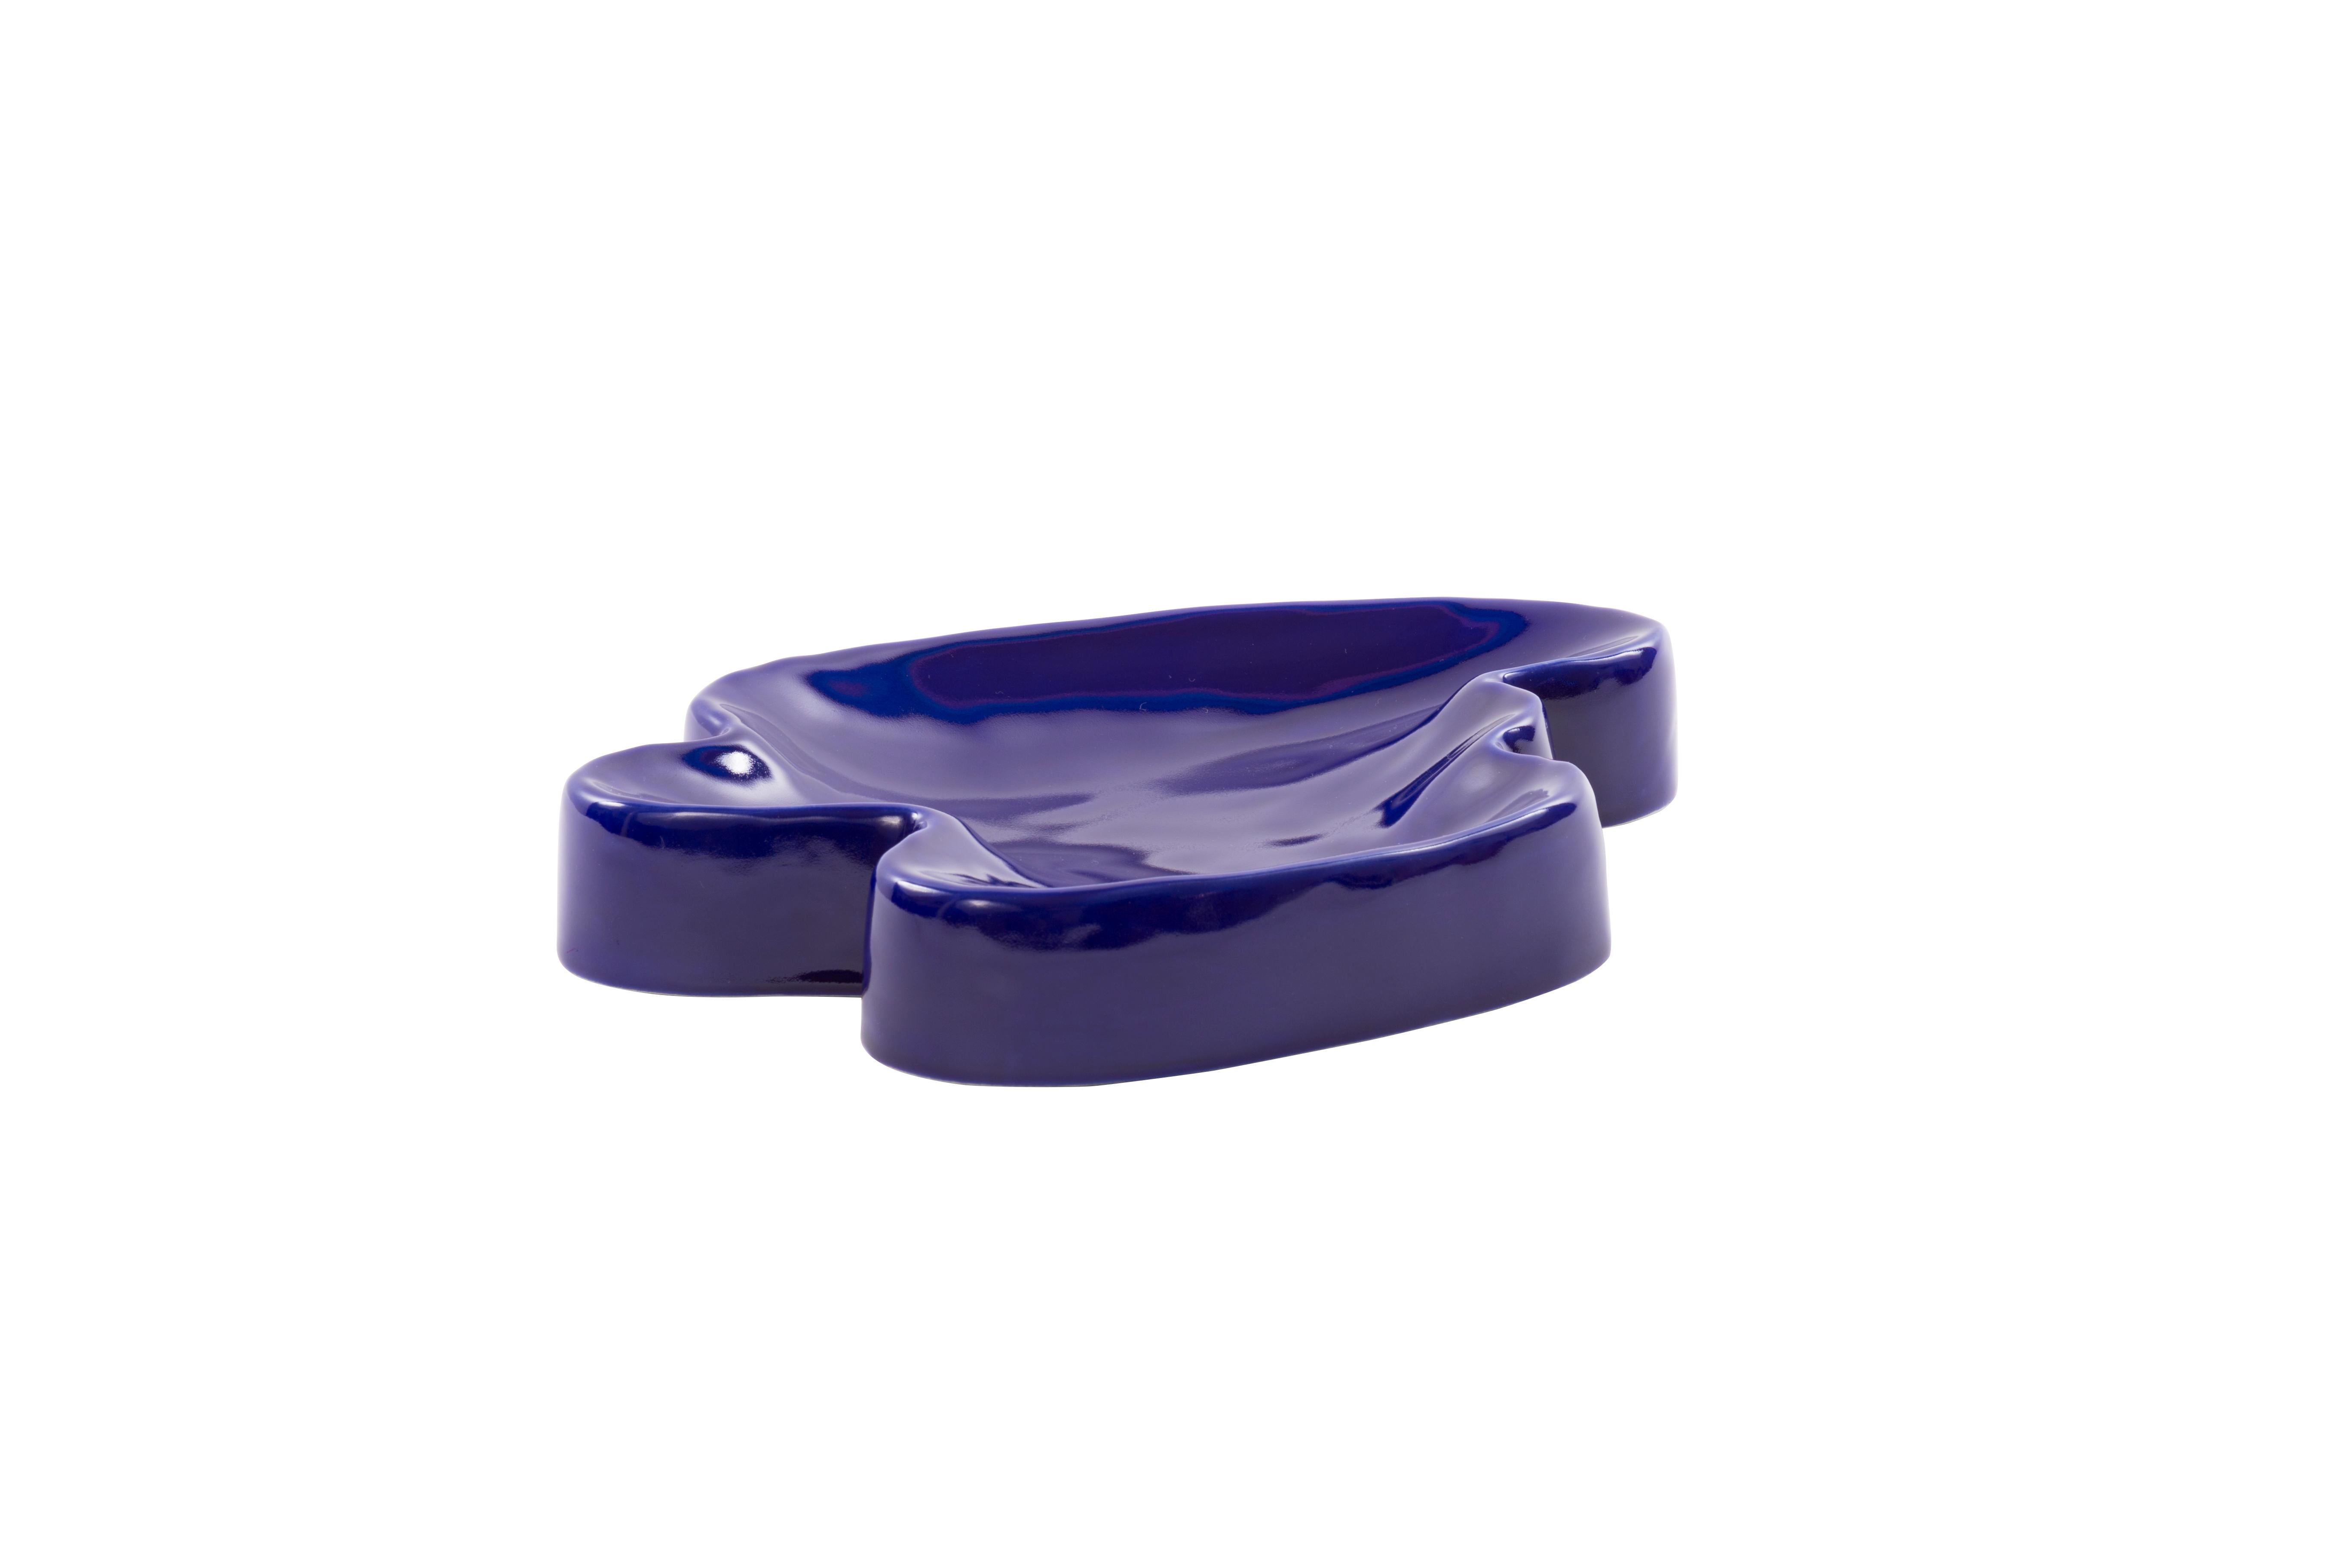 Lake small cobalt tray by Pulpo
Dimensions: D 27 x W 20 x H 4 cm
Materials: Ceramic

Also available in different colours.

These charming additions allow you to create a true tablescape environment; from the tones and textures of the urban